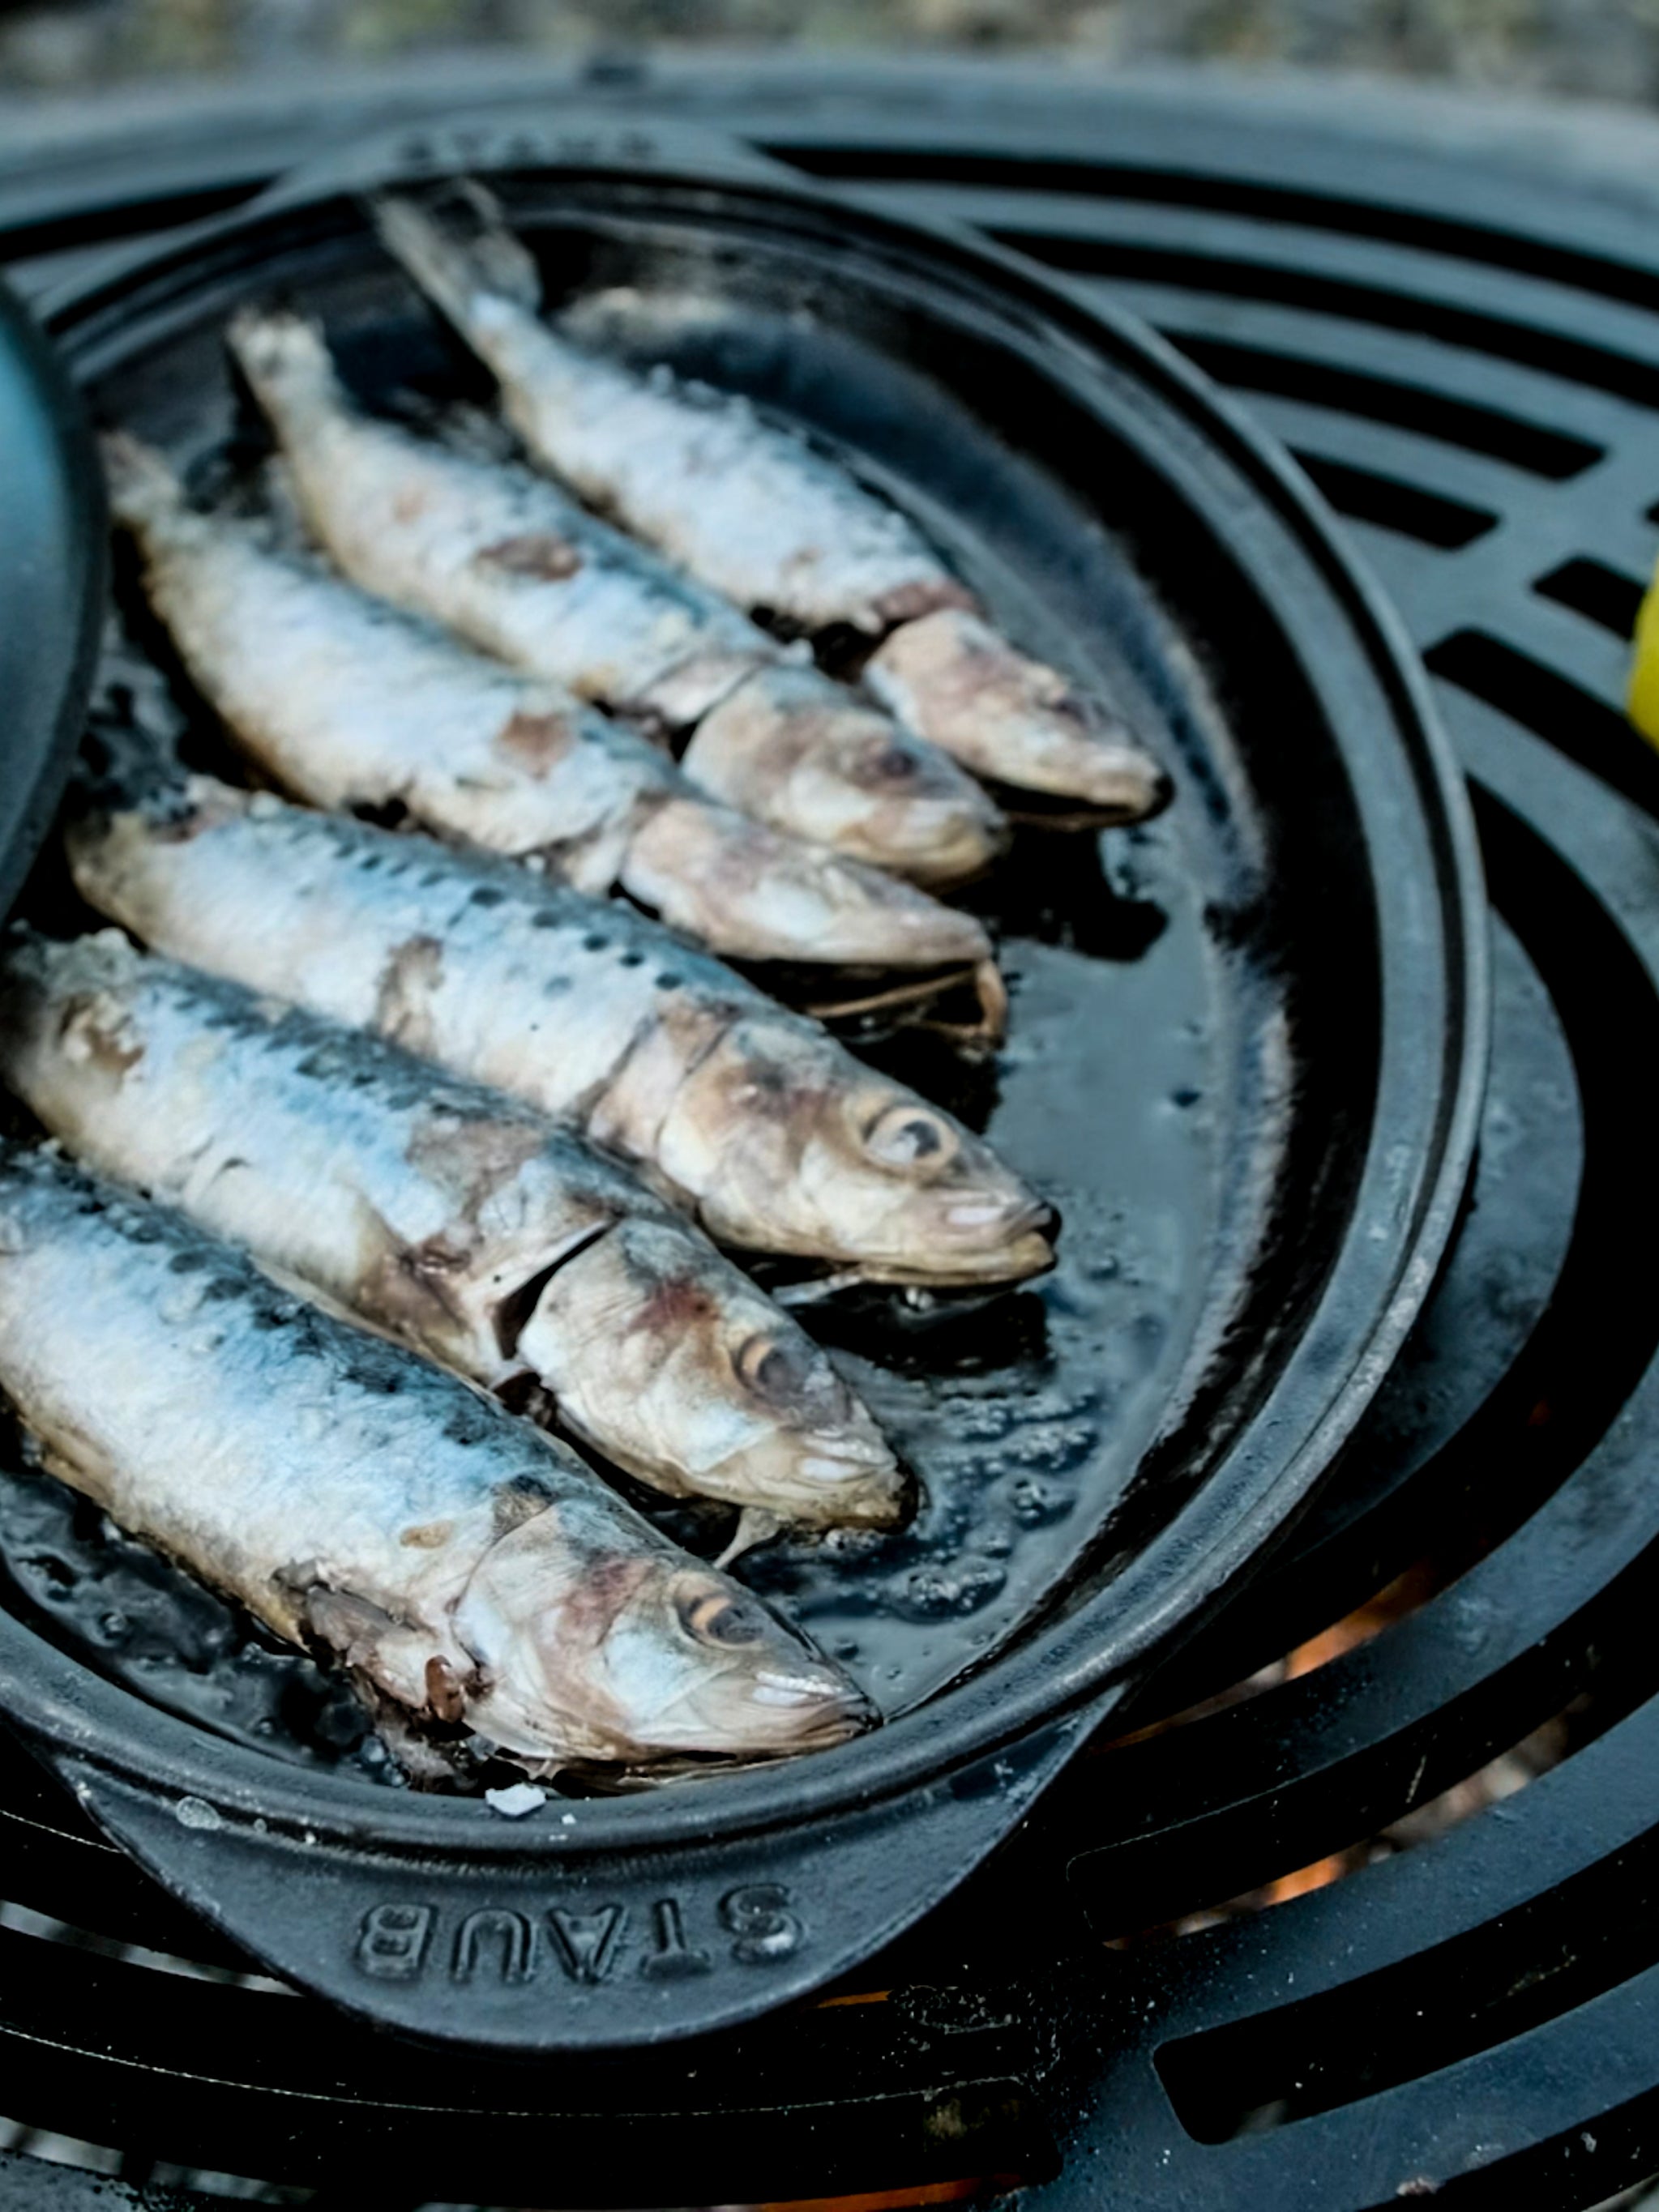 Fish Grill Pan in Cast Iron